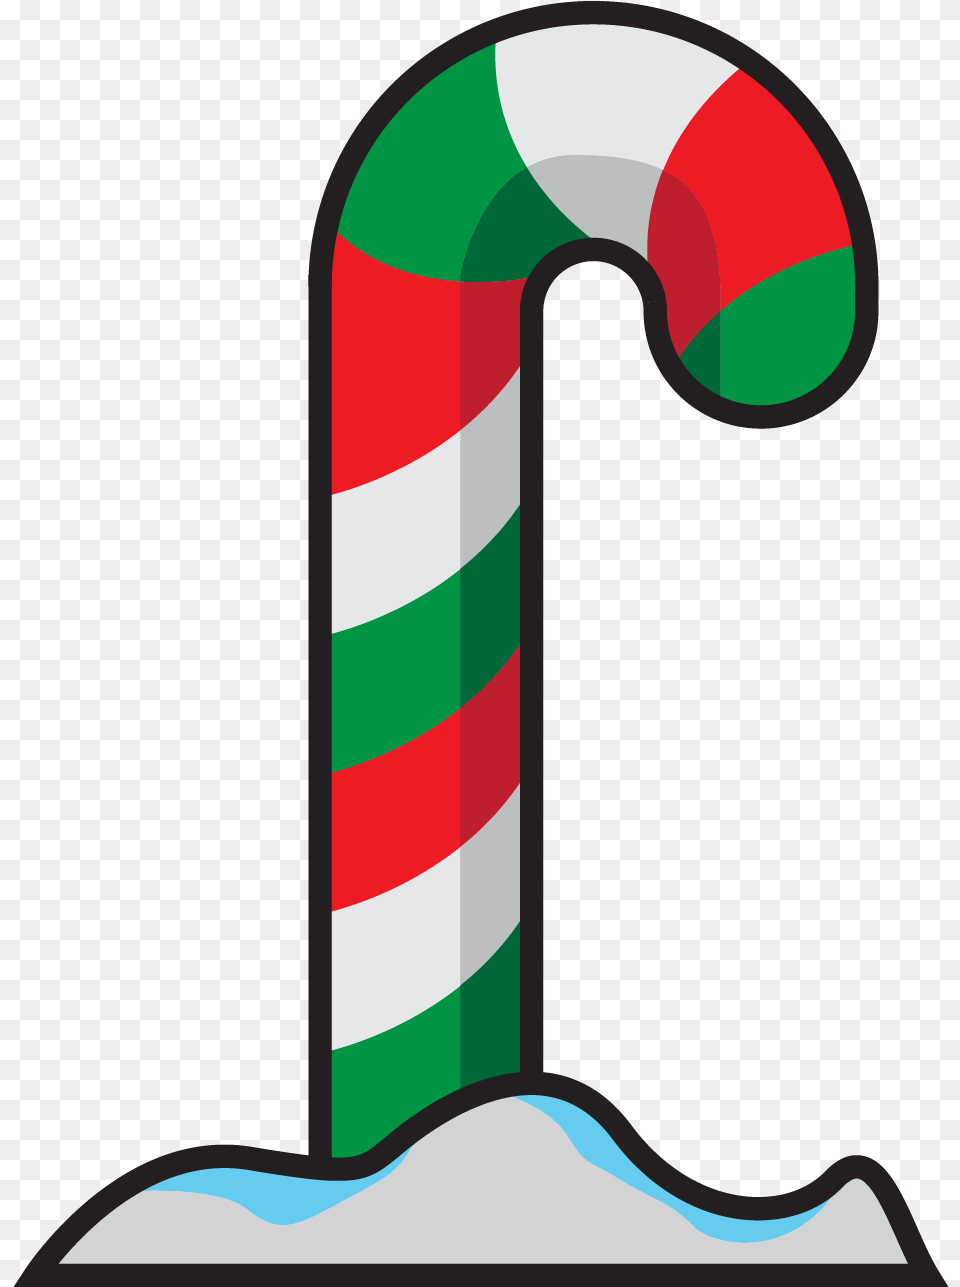 Candy Cane In Christmas Icon With Snow Candy Cane, Food, Sweets, Stick, Dynamite Png Image